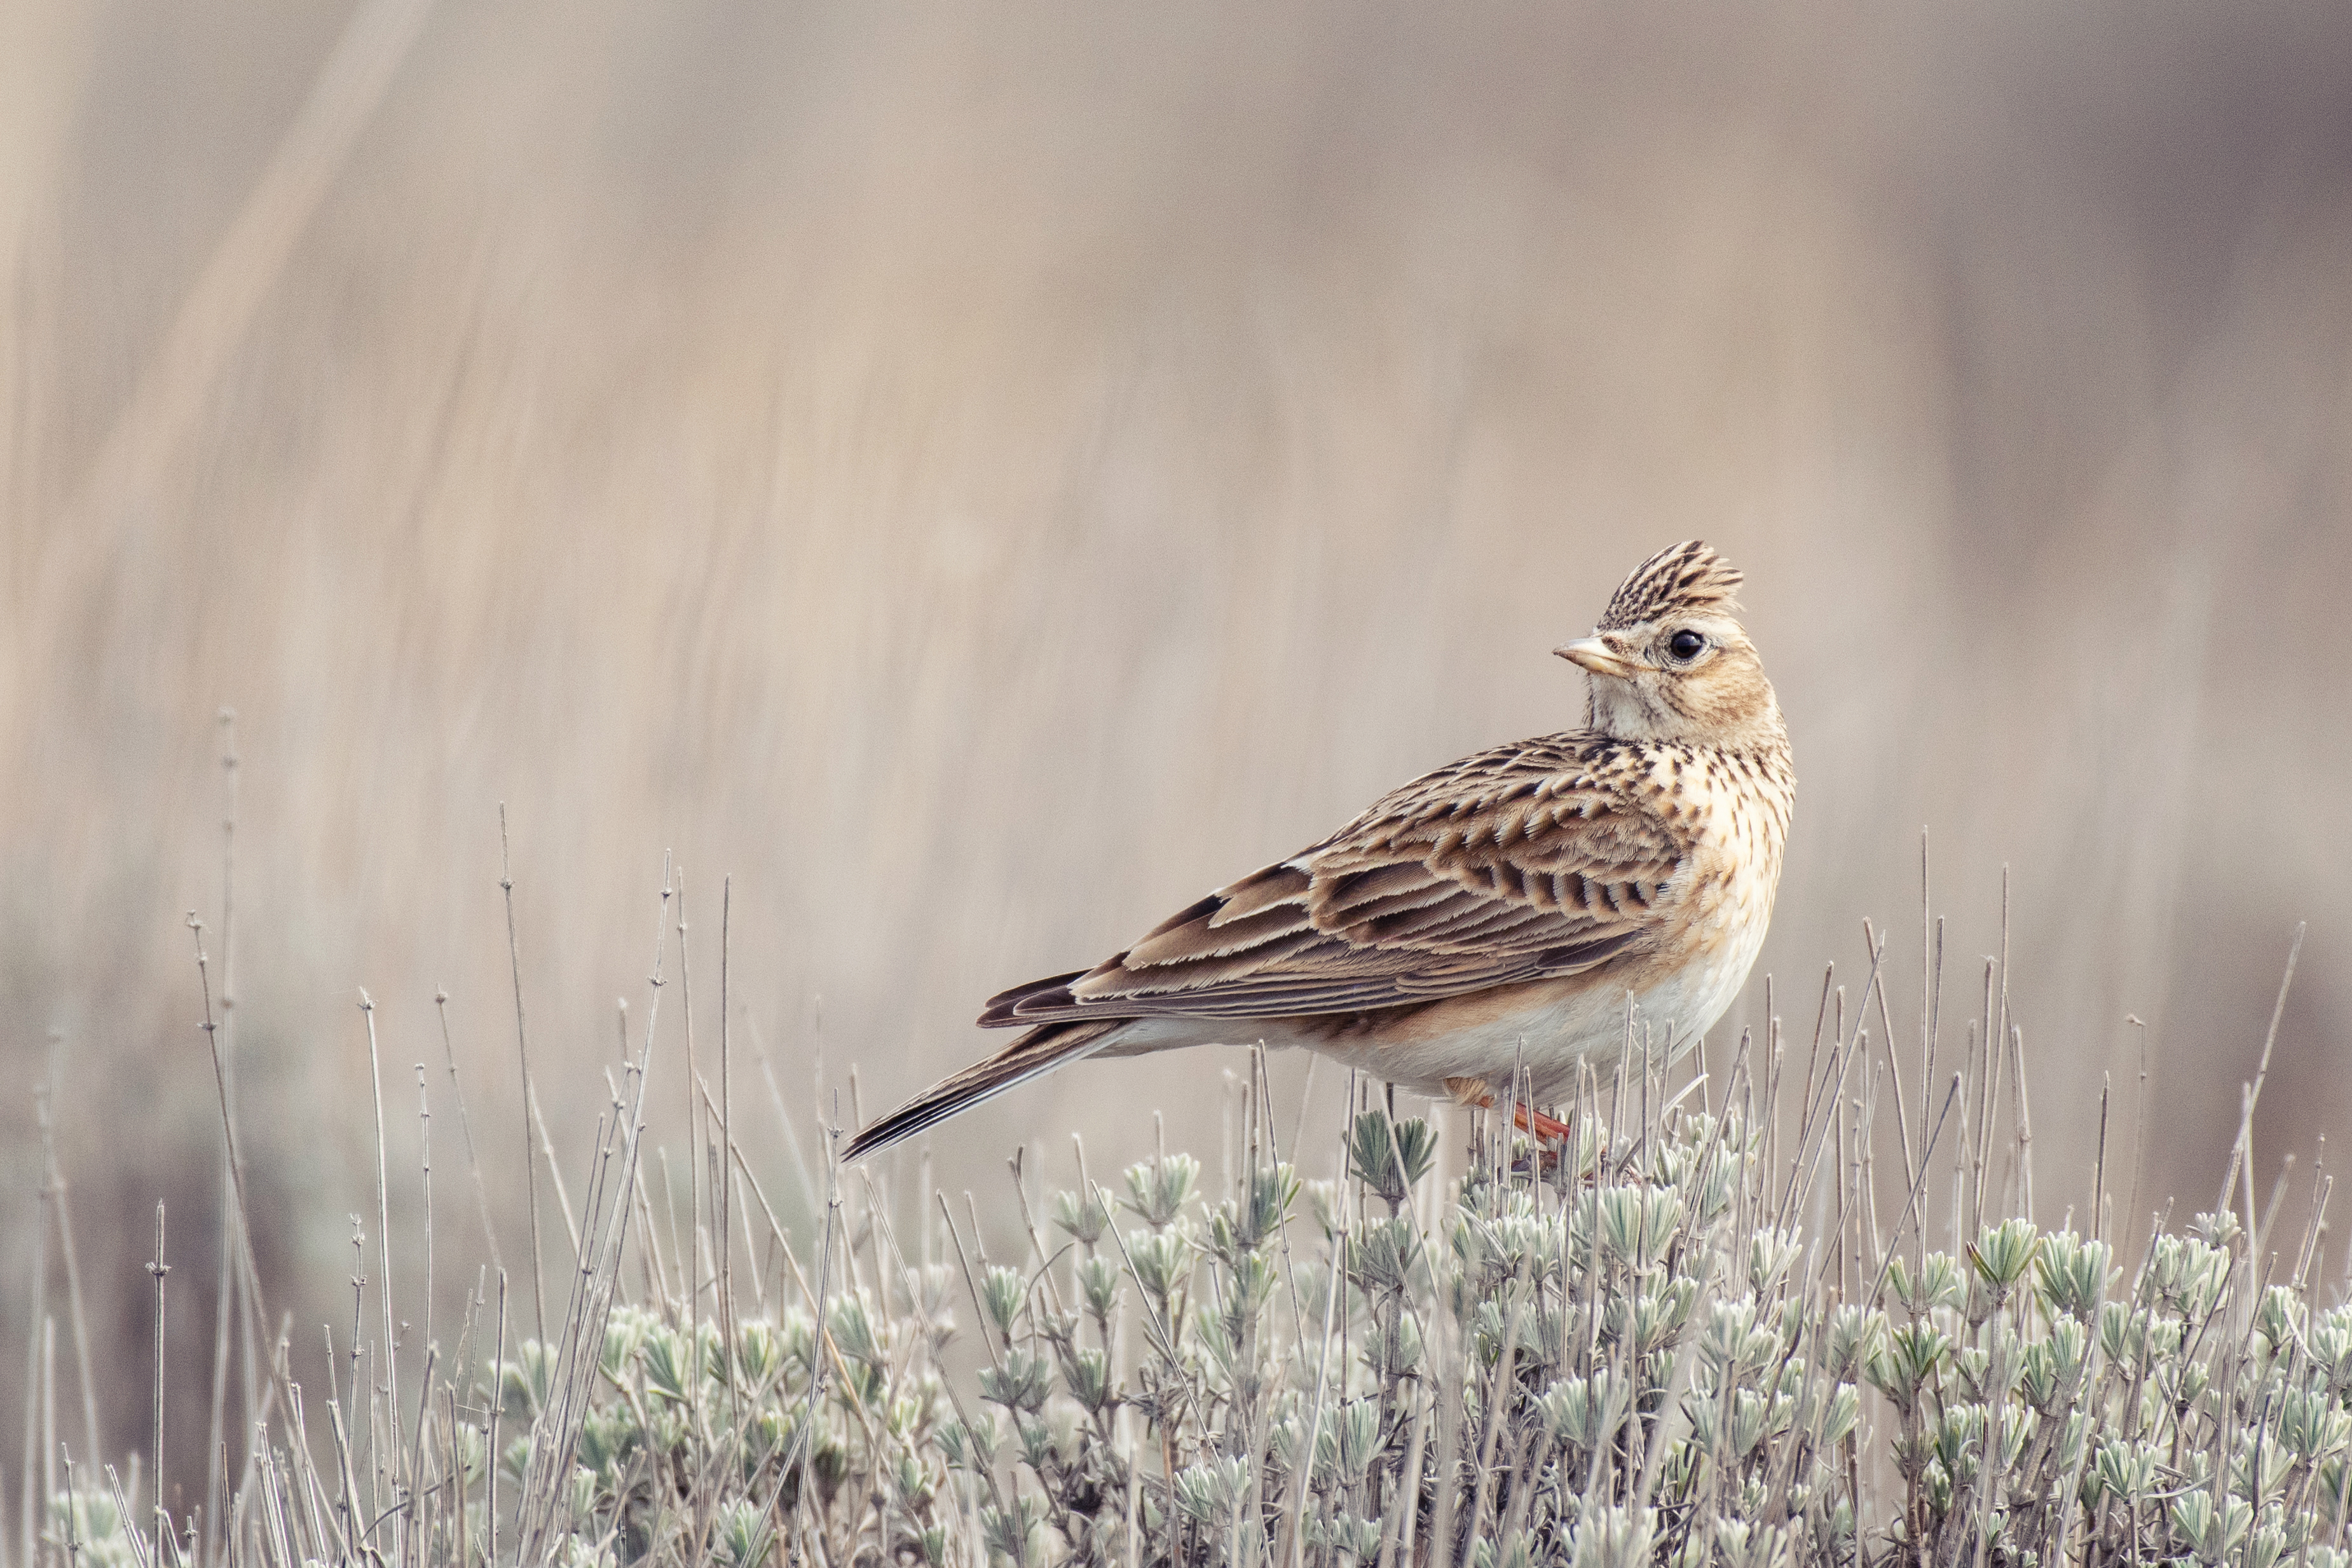 A lone Skylark perched on a mound covered in brown grass,